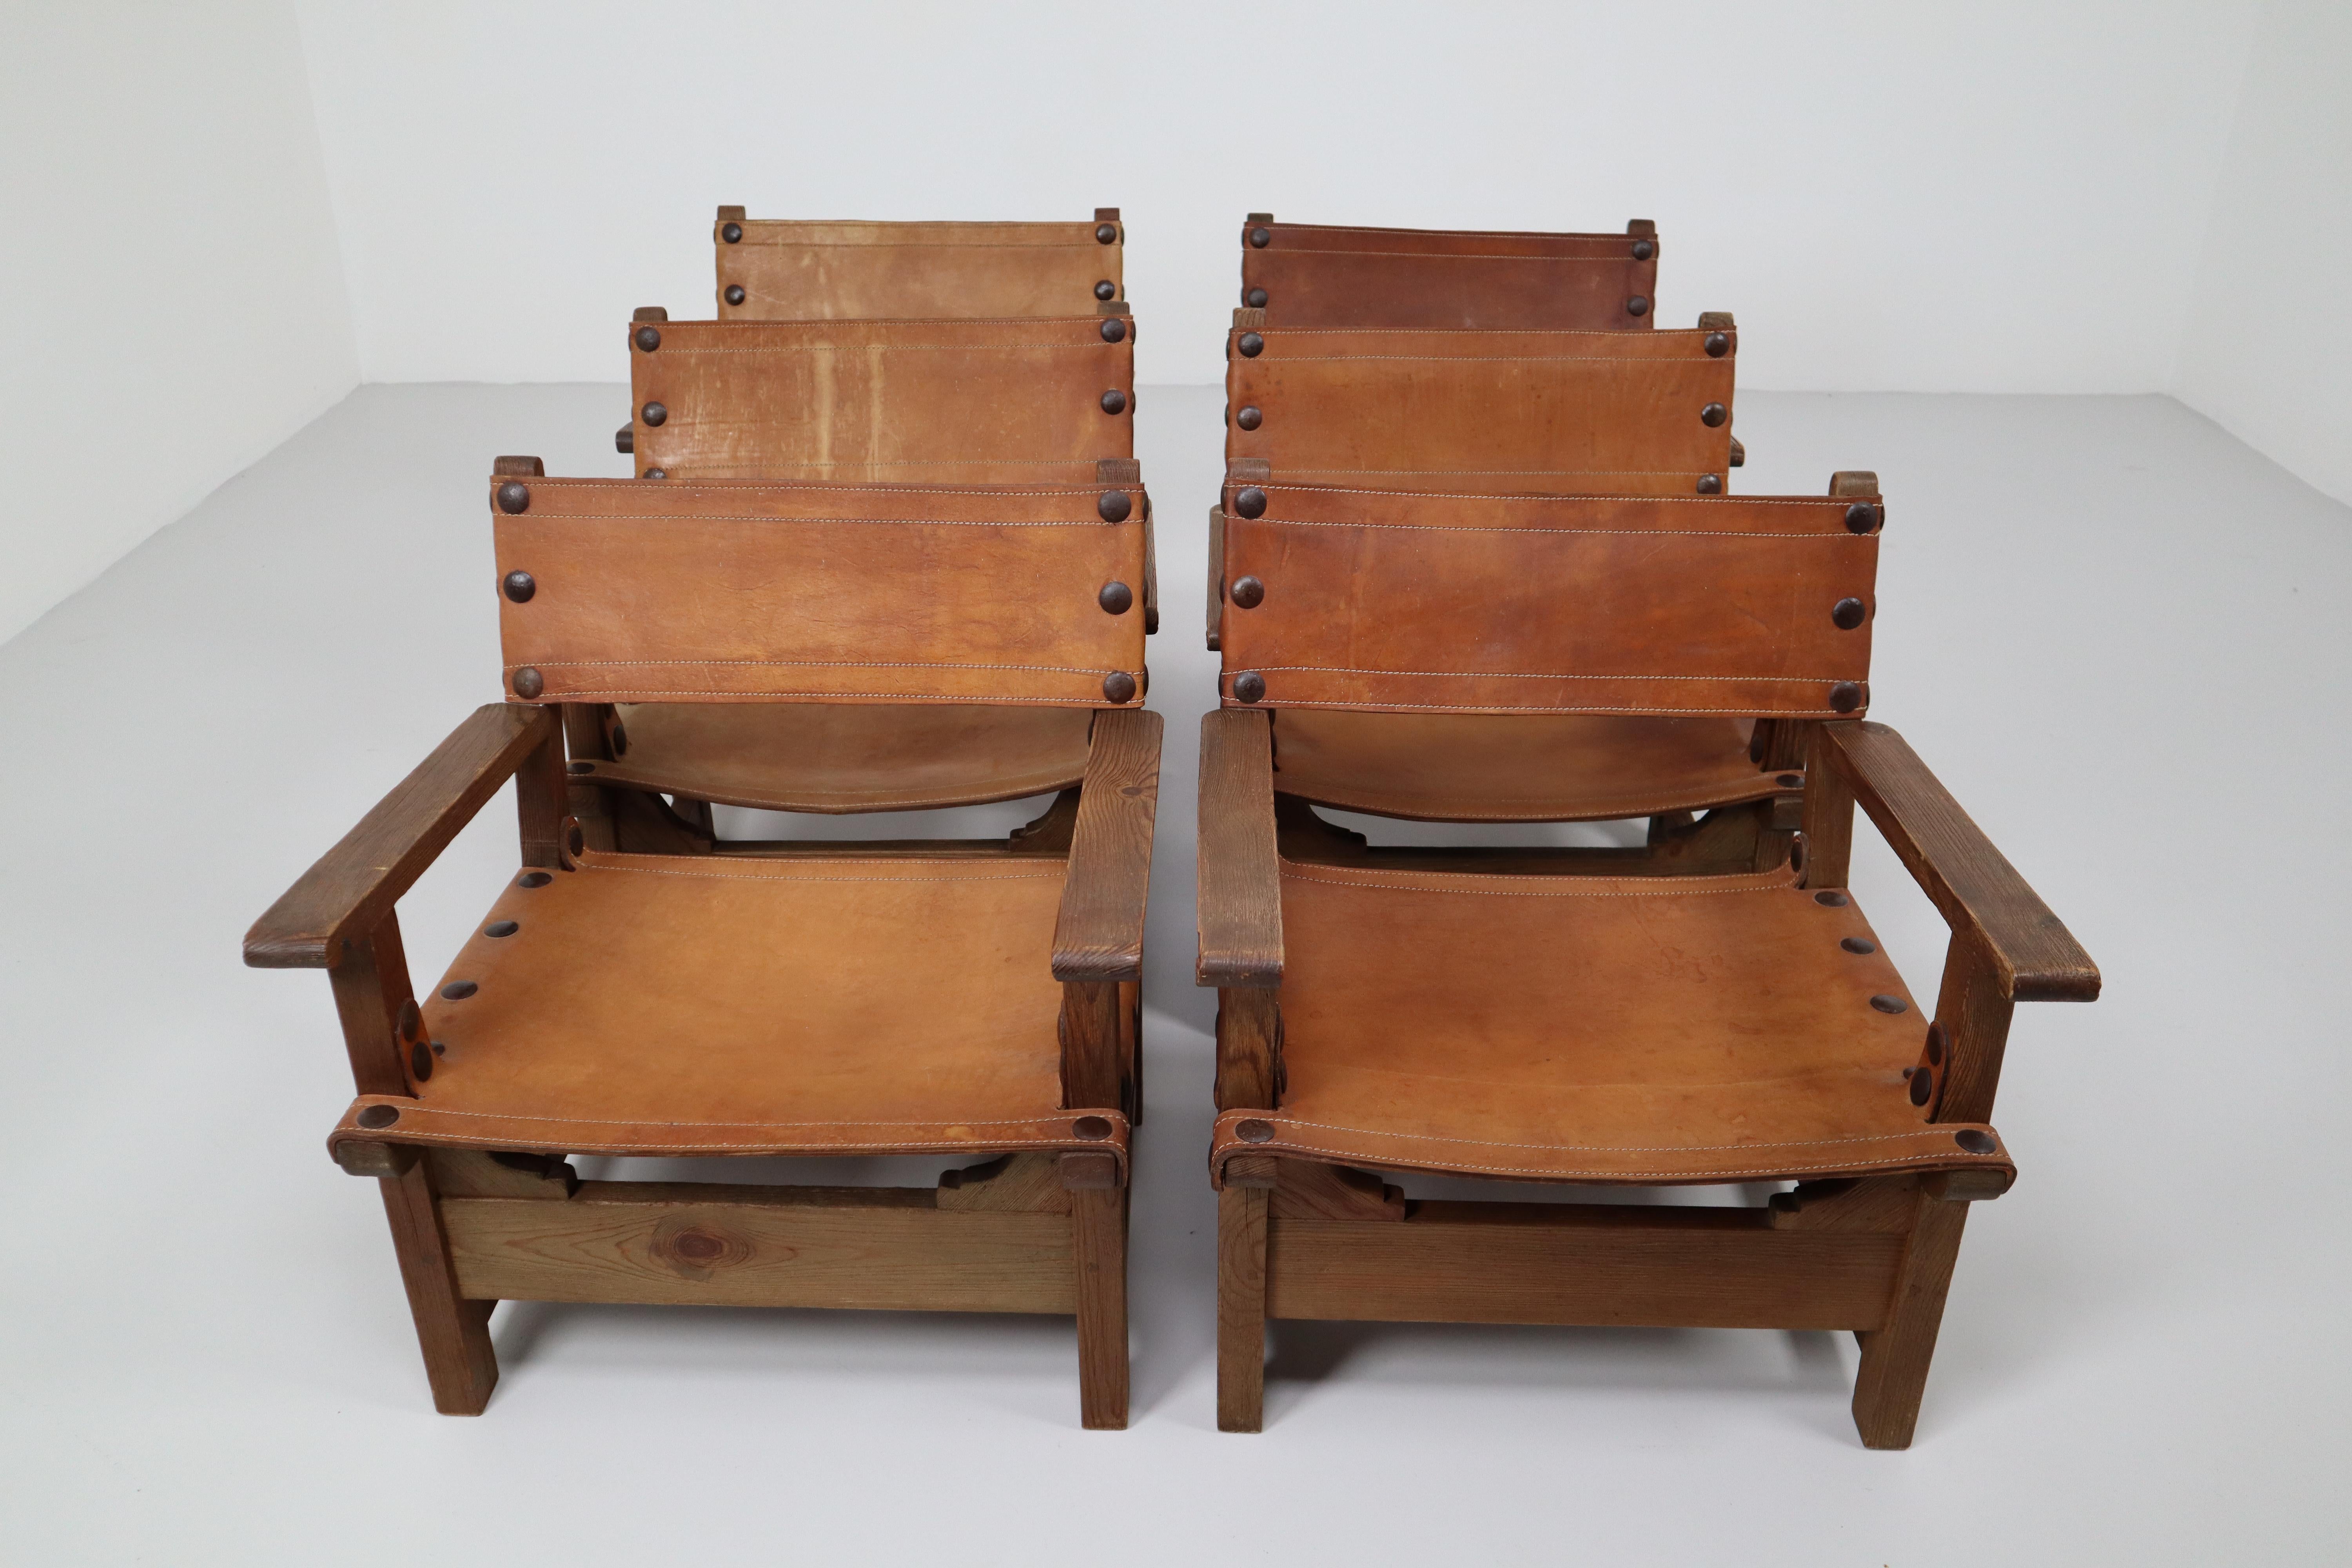 French Provincial Six Midcentury French Lounge Chairs in Patinated Cognac Saddle Leather, 1950s